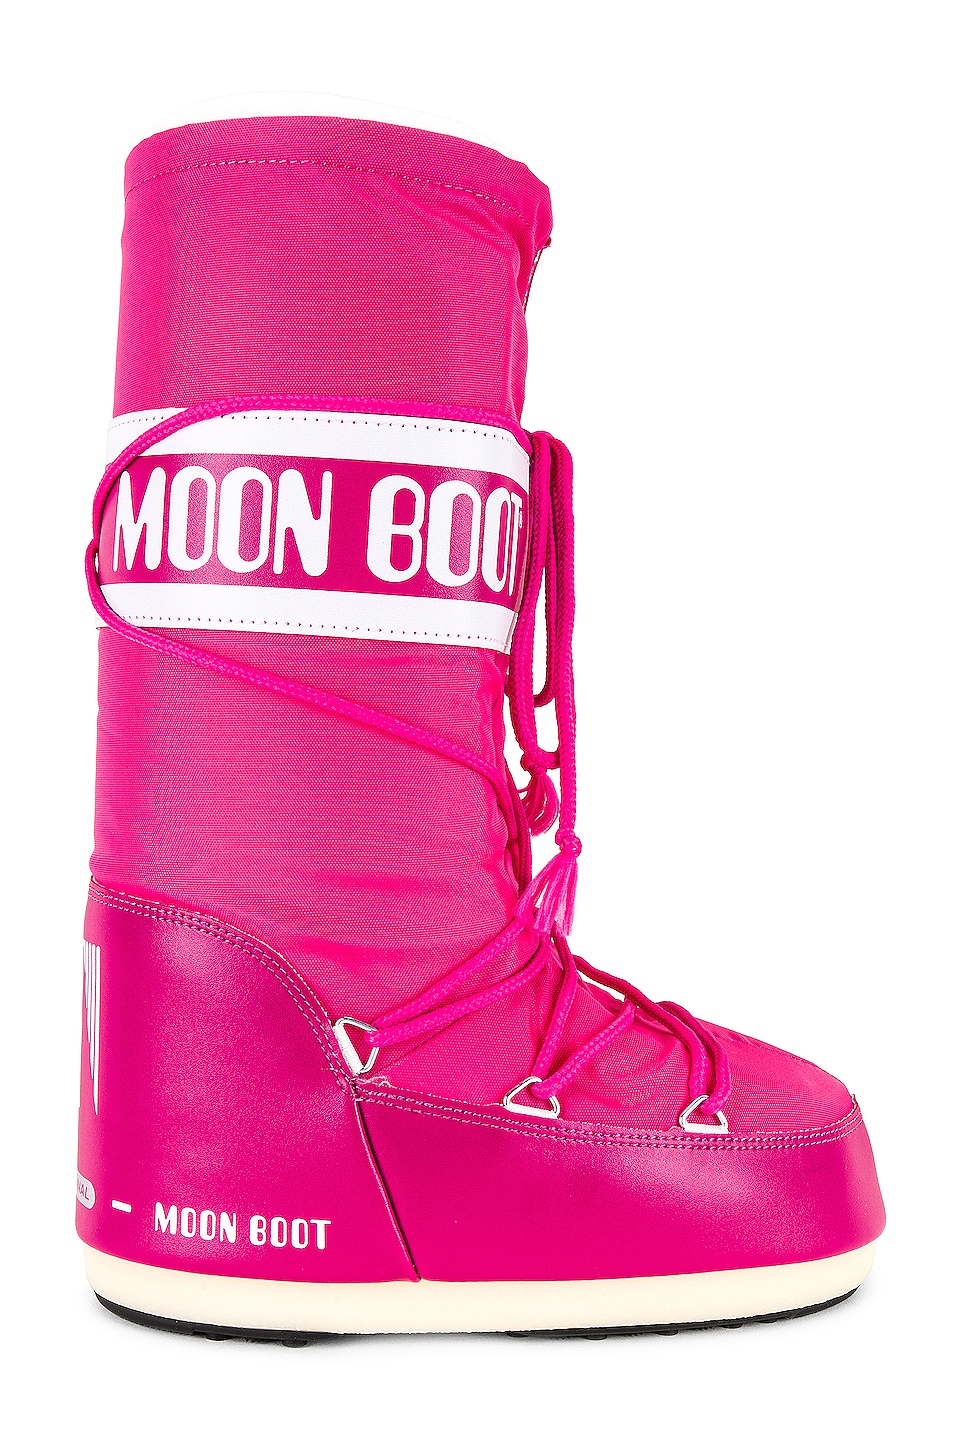 How to Style This Winter’s Trendiest Shoe: Moon Boots